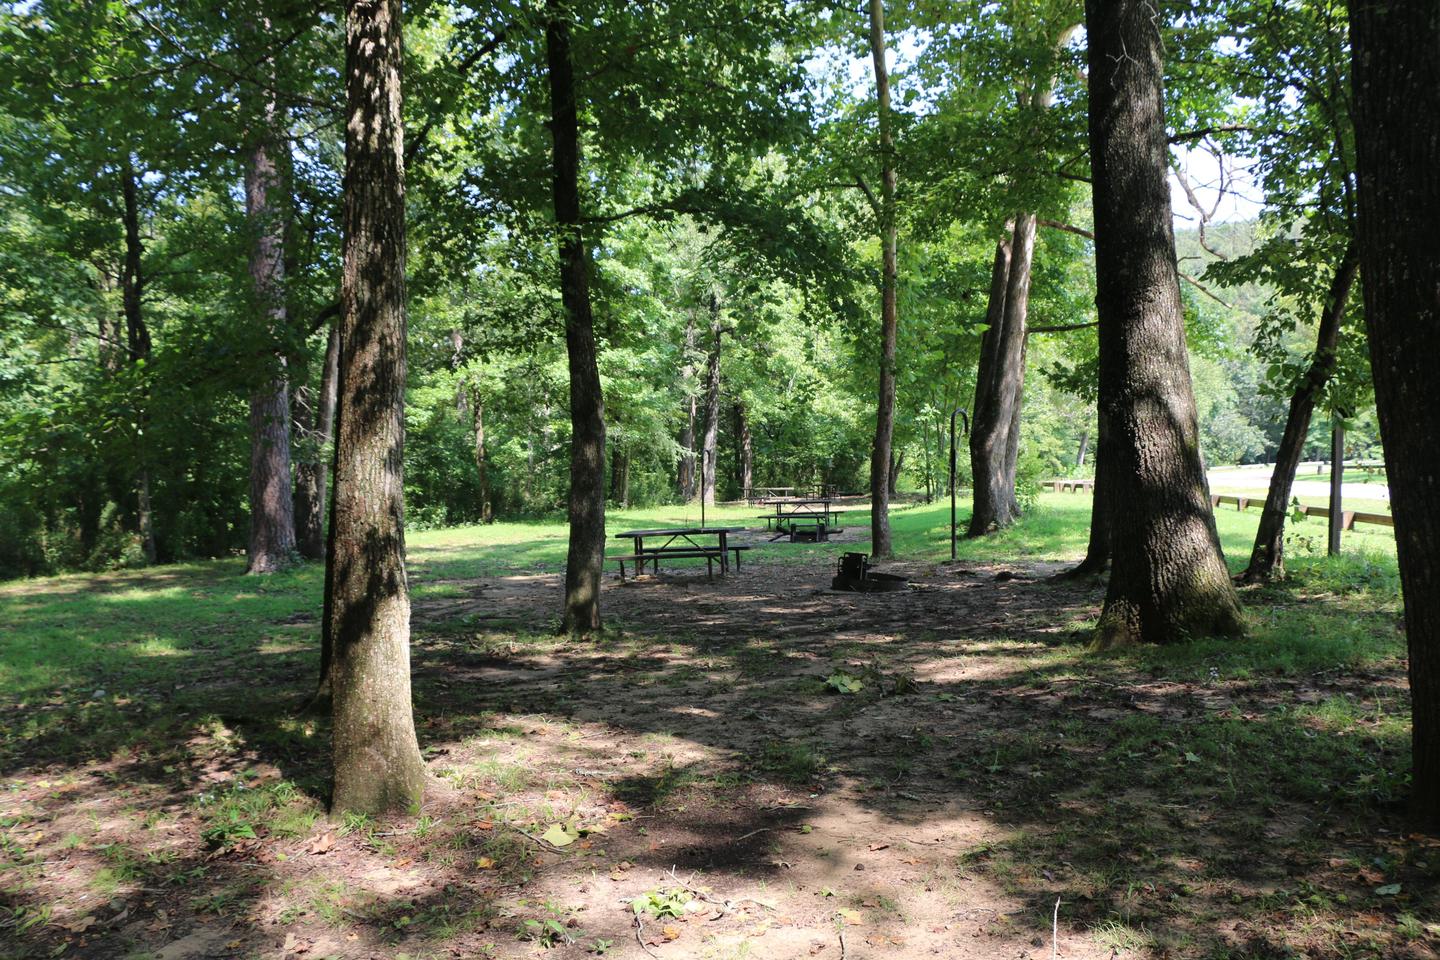 Ozark Campground Tent SitesA mix of sunny and shady sites are available for campers at Ozark Campground.